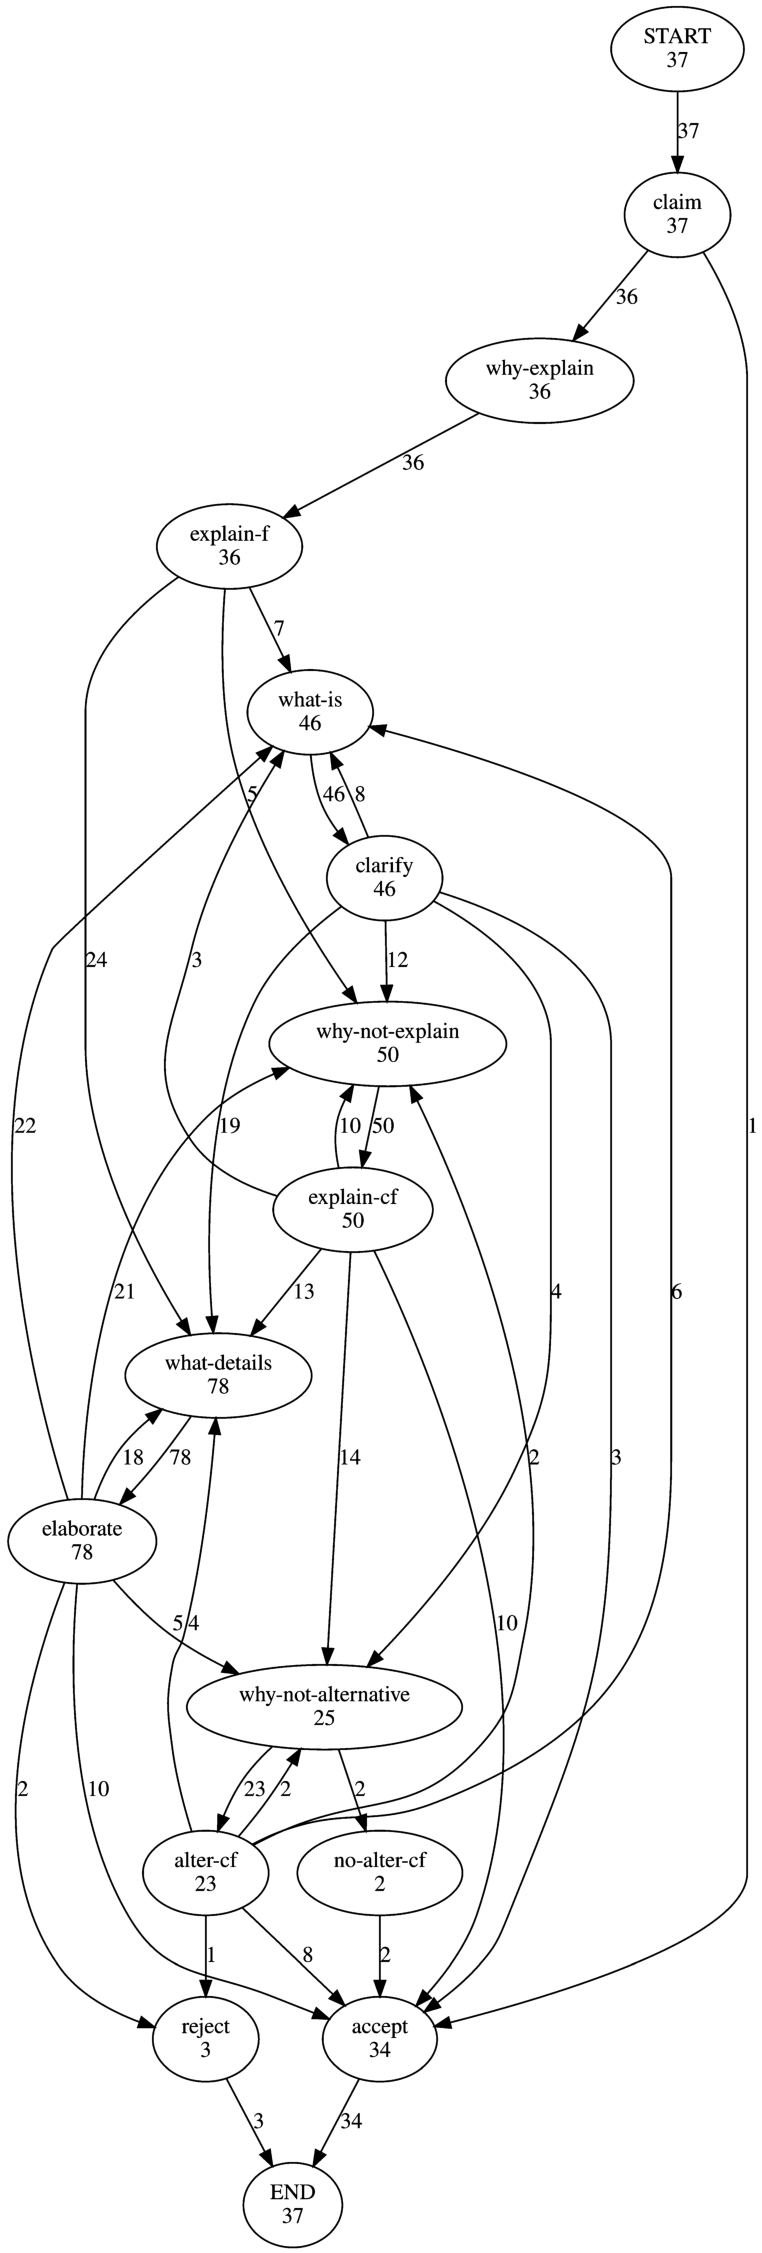 The full process model of the collected beer style classification explanatory dialogues. For illustrative purposes, pairs of termination nodes, i.e. {accept-u, accept-s} and {reject-u and reject-s}, are merged into accept and reject, respectively.